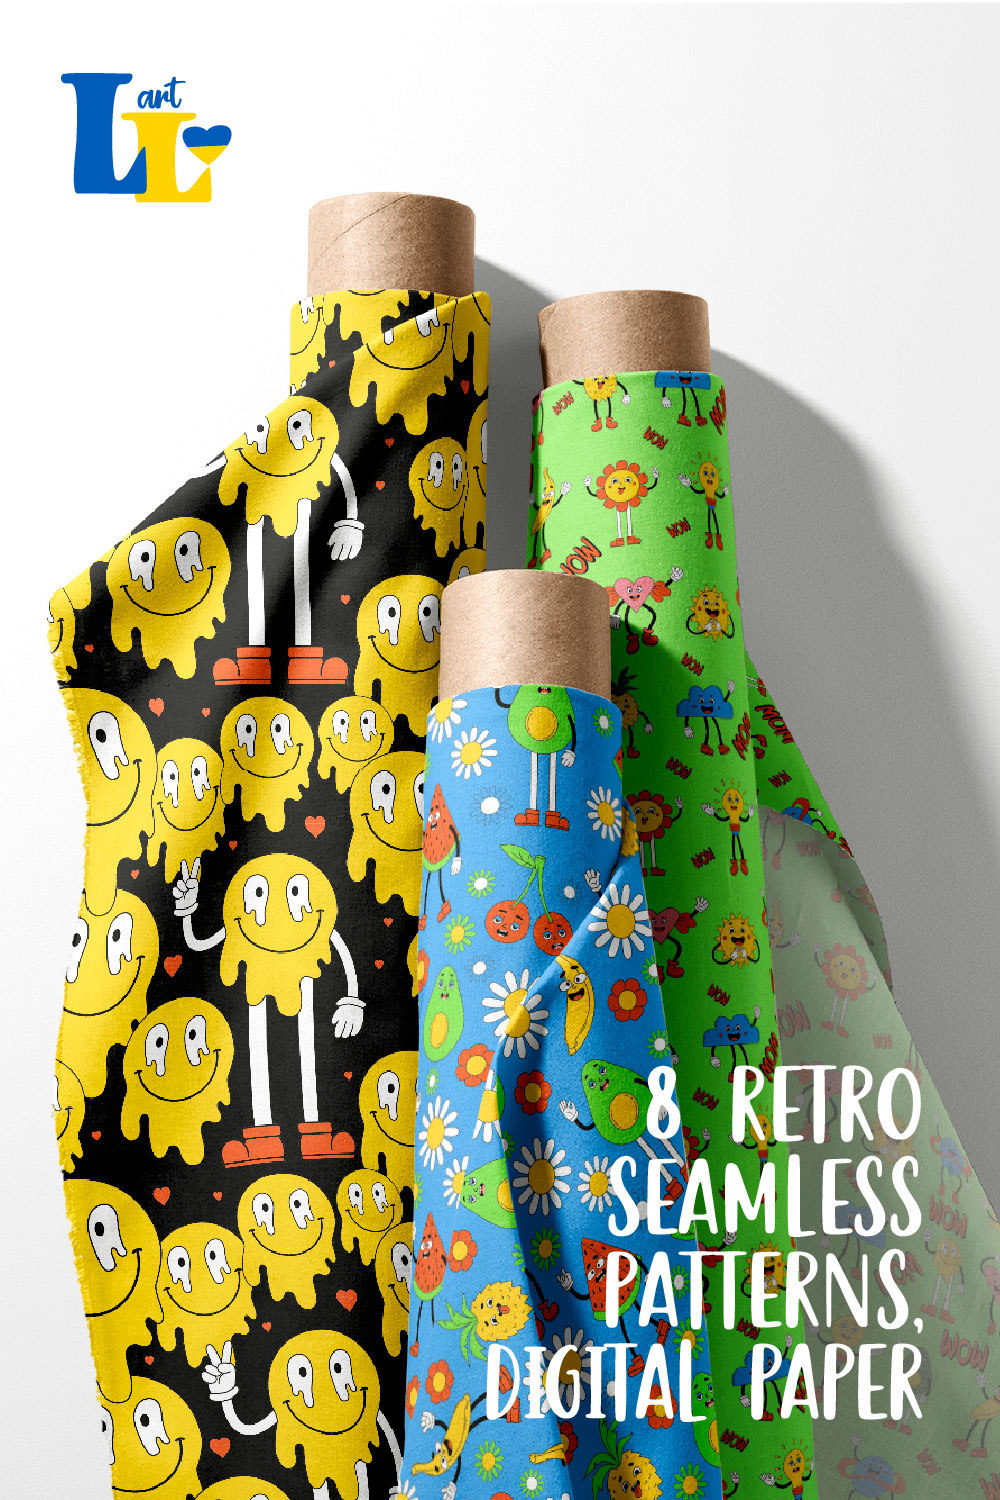 Retro Seamless Patterns, Groovy Backgrounds pinterest image.